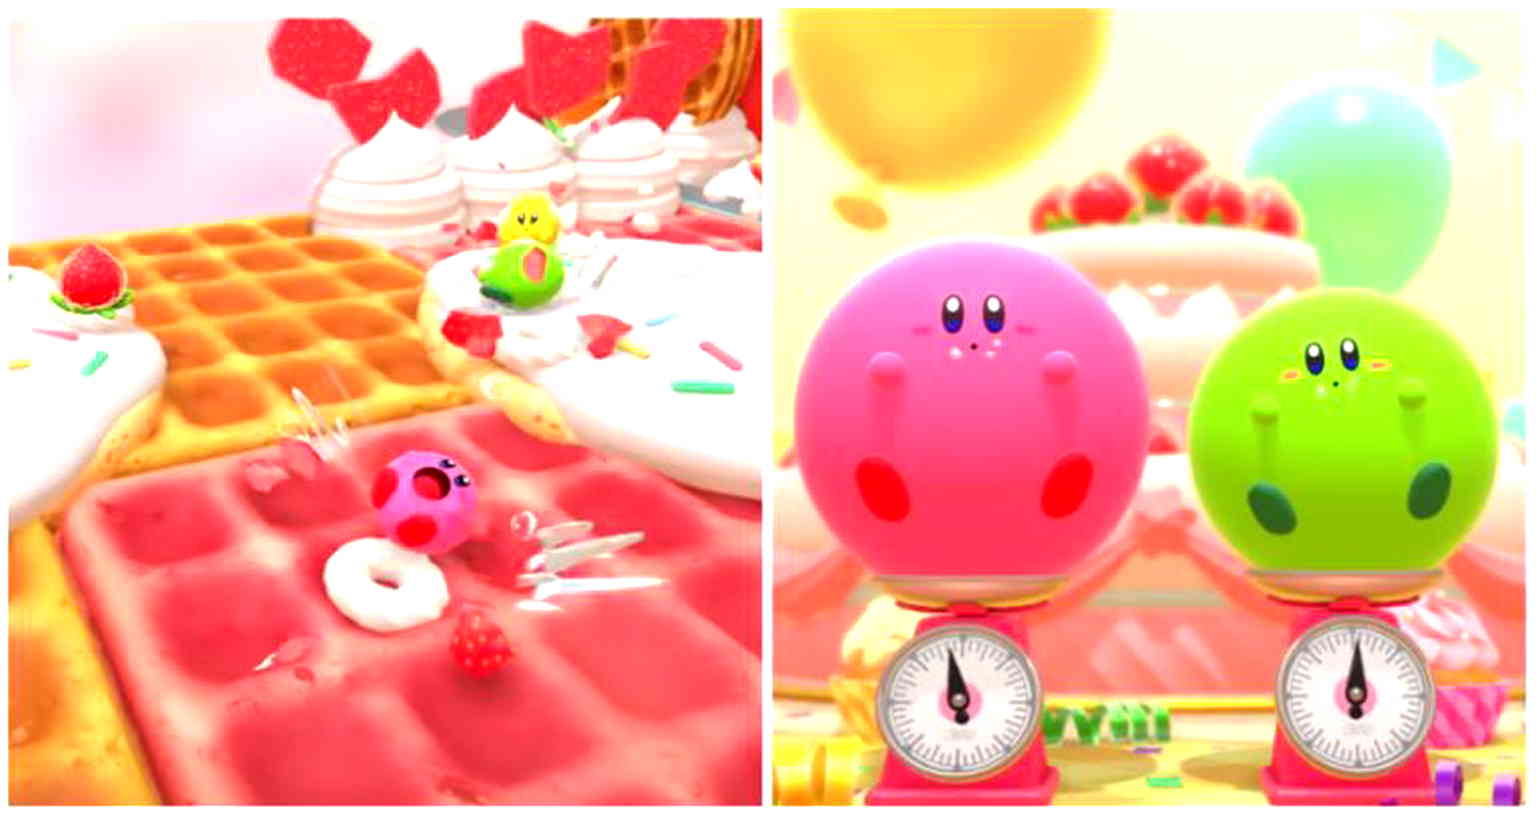 Nintendo Switch party game ‘Kirby’s Dream Buffet’ releasing next week